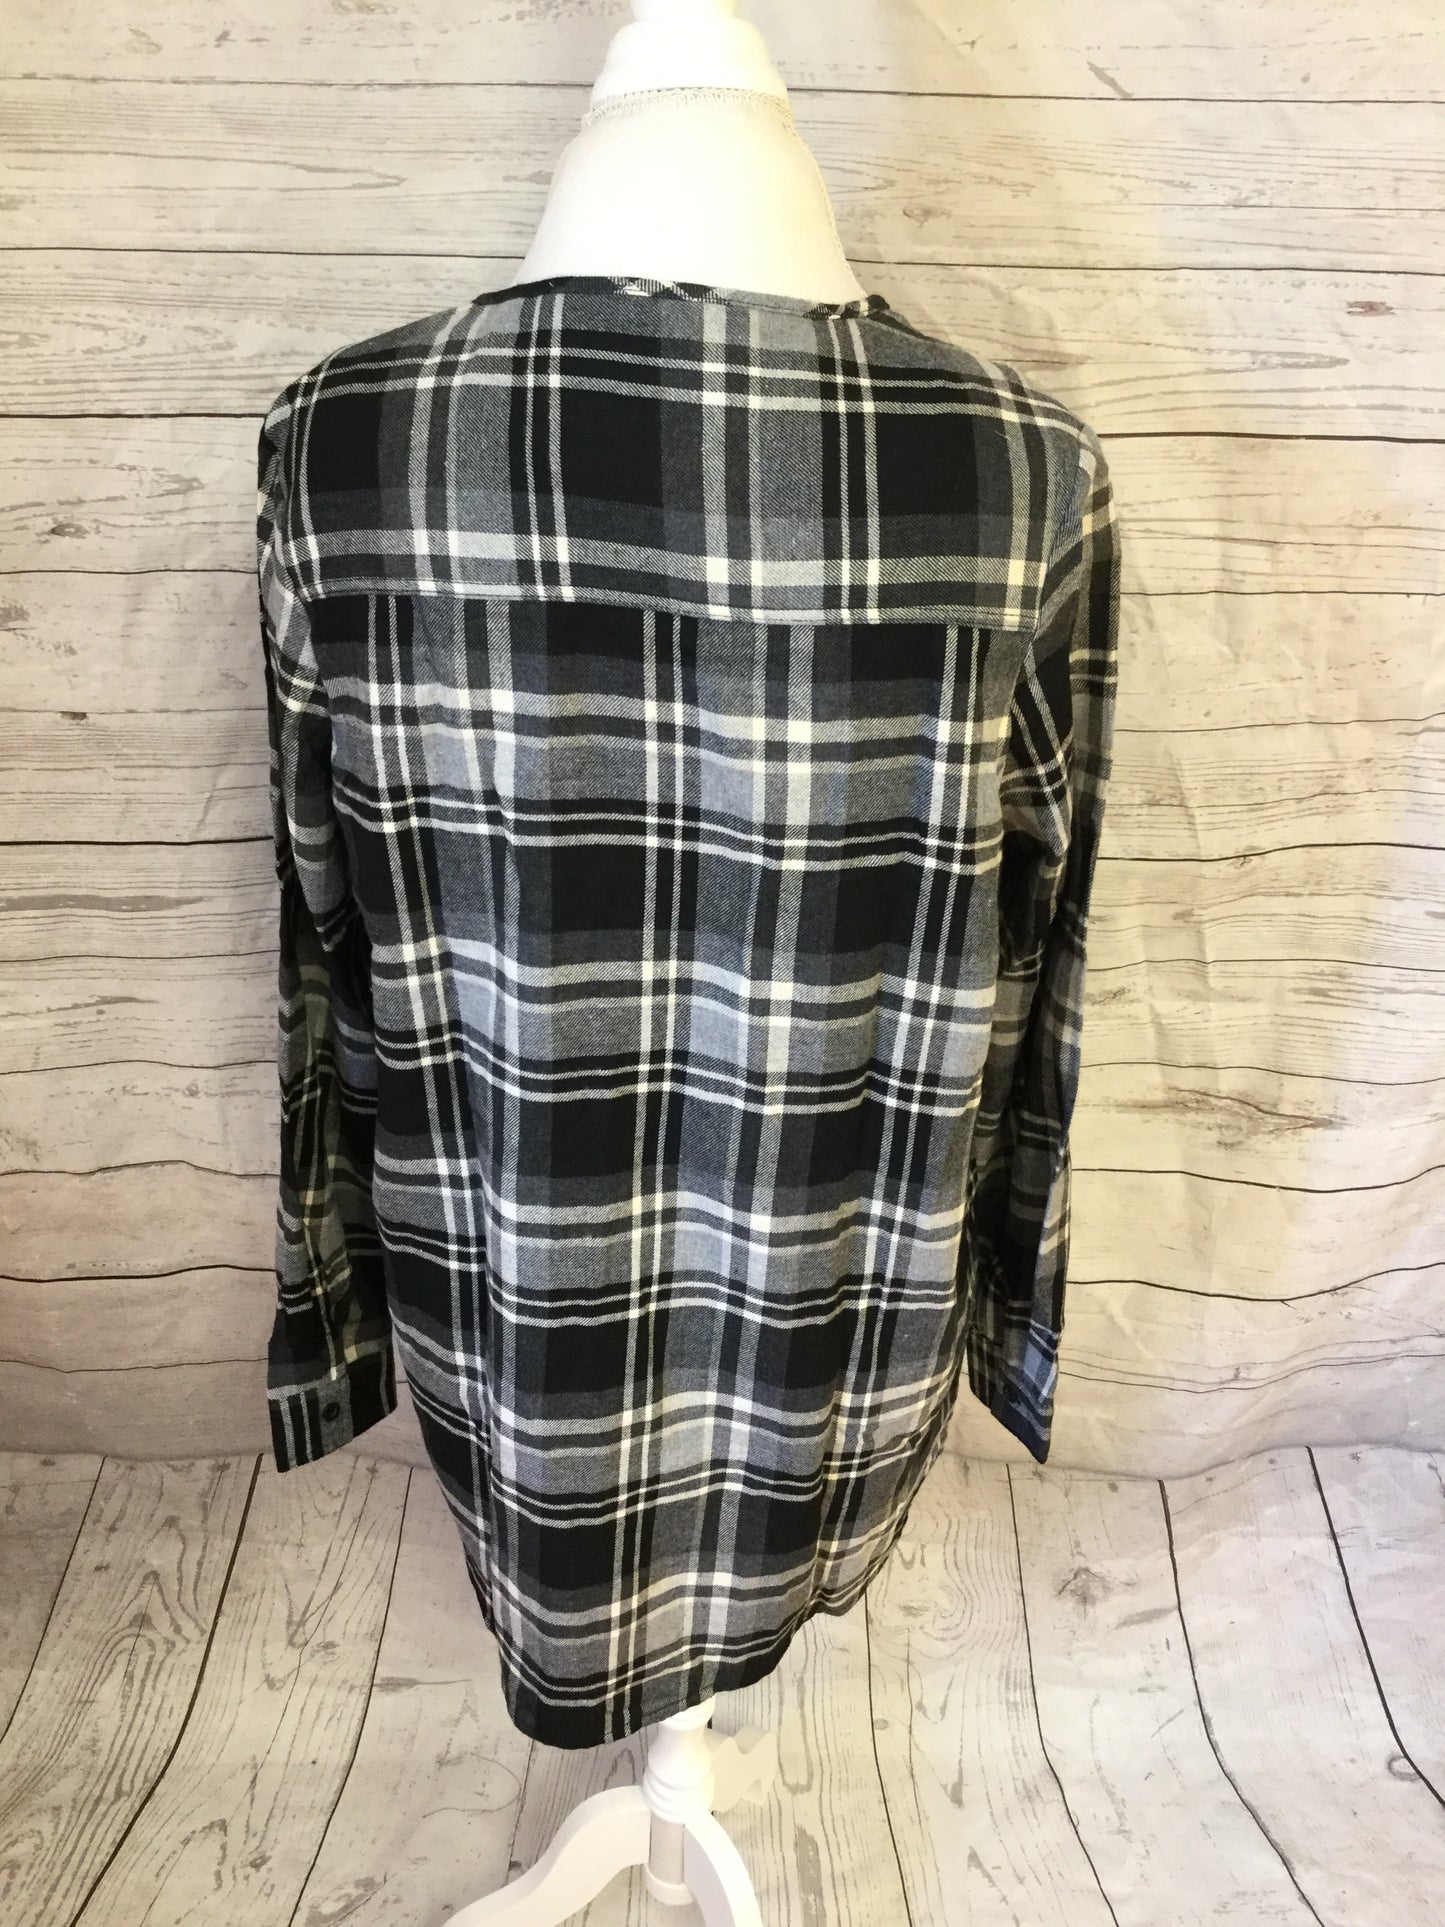 Lace Up Plaid Black and White Flannel To